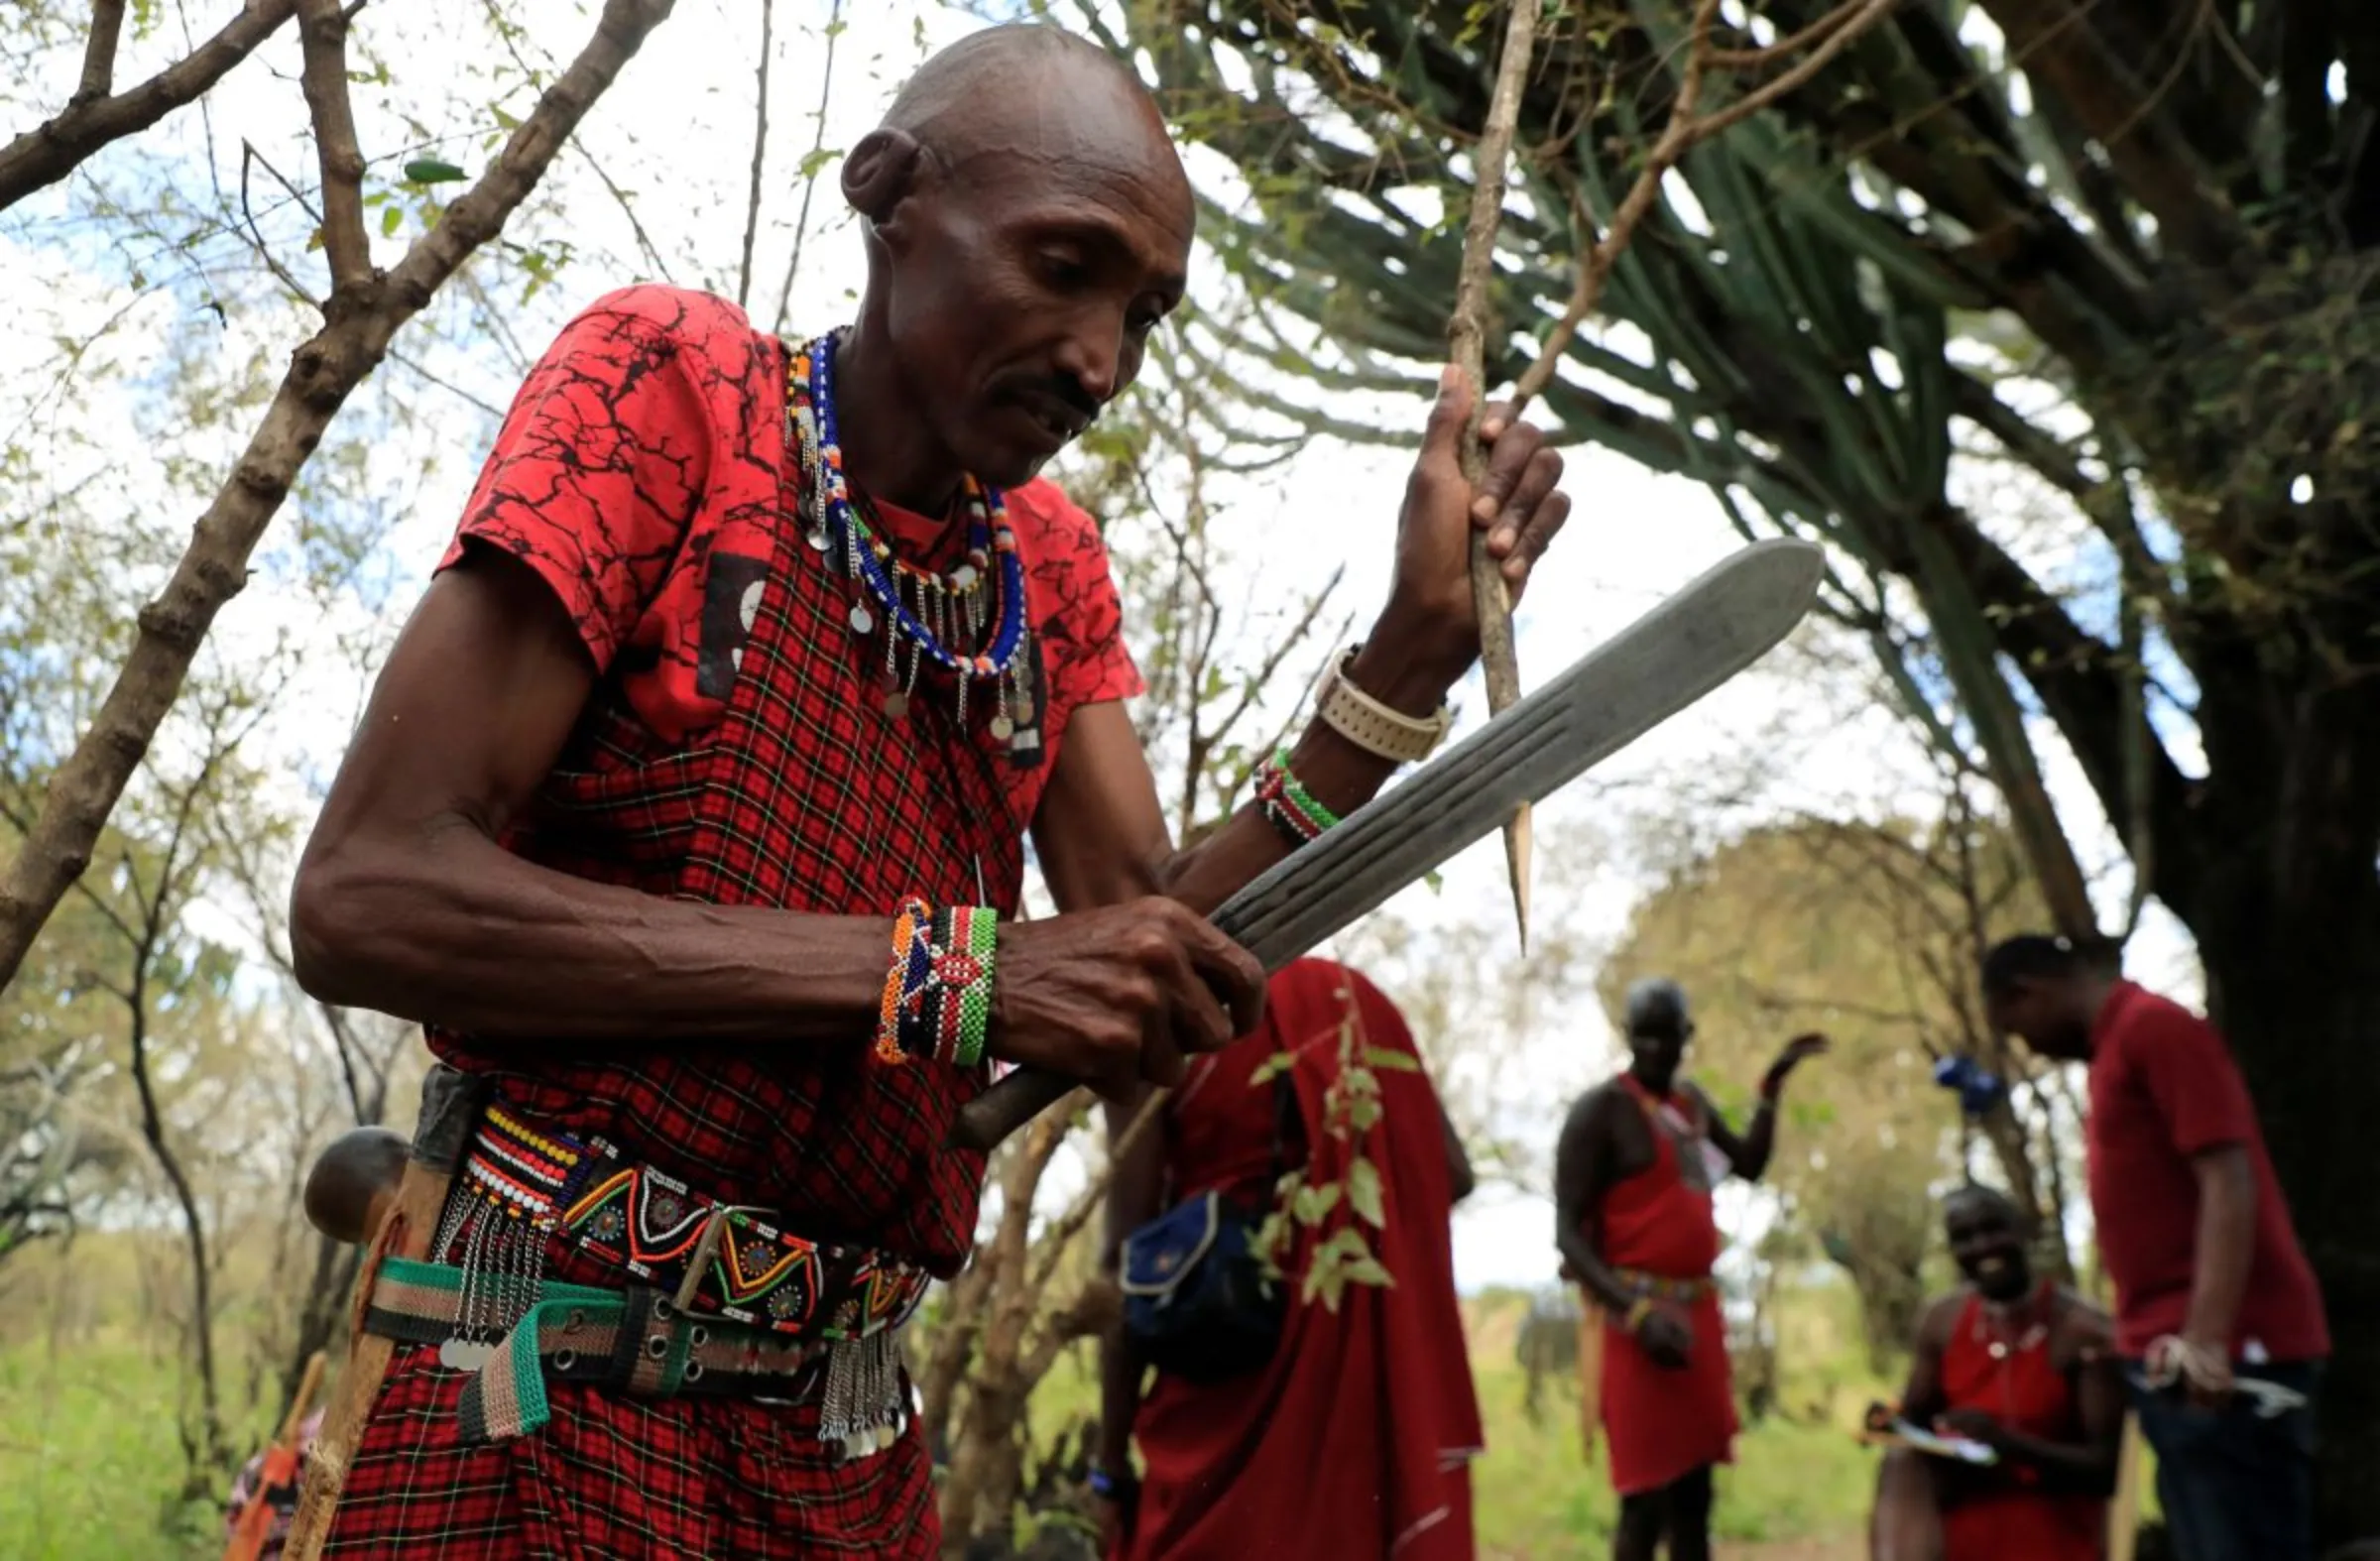 A member of the indigenous Maasai community prepares sticks to roast meat at the inaugural Maasai Cultural Festival that aims to promote peace, tourism, and cultural exchange in Sekenani village, the heart of world-famous Maasai Mara National Reserve, in Narok county, Kenya June 9, 2023